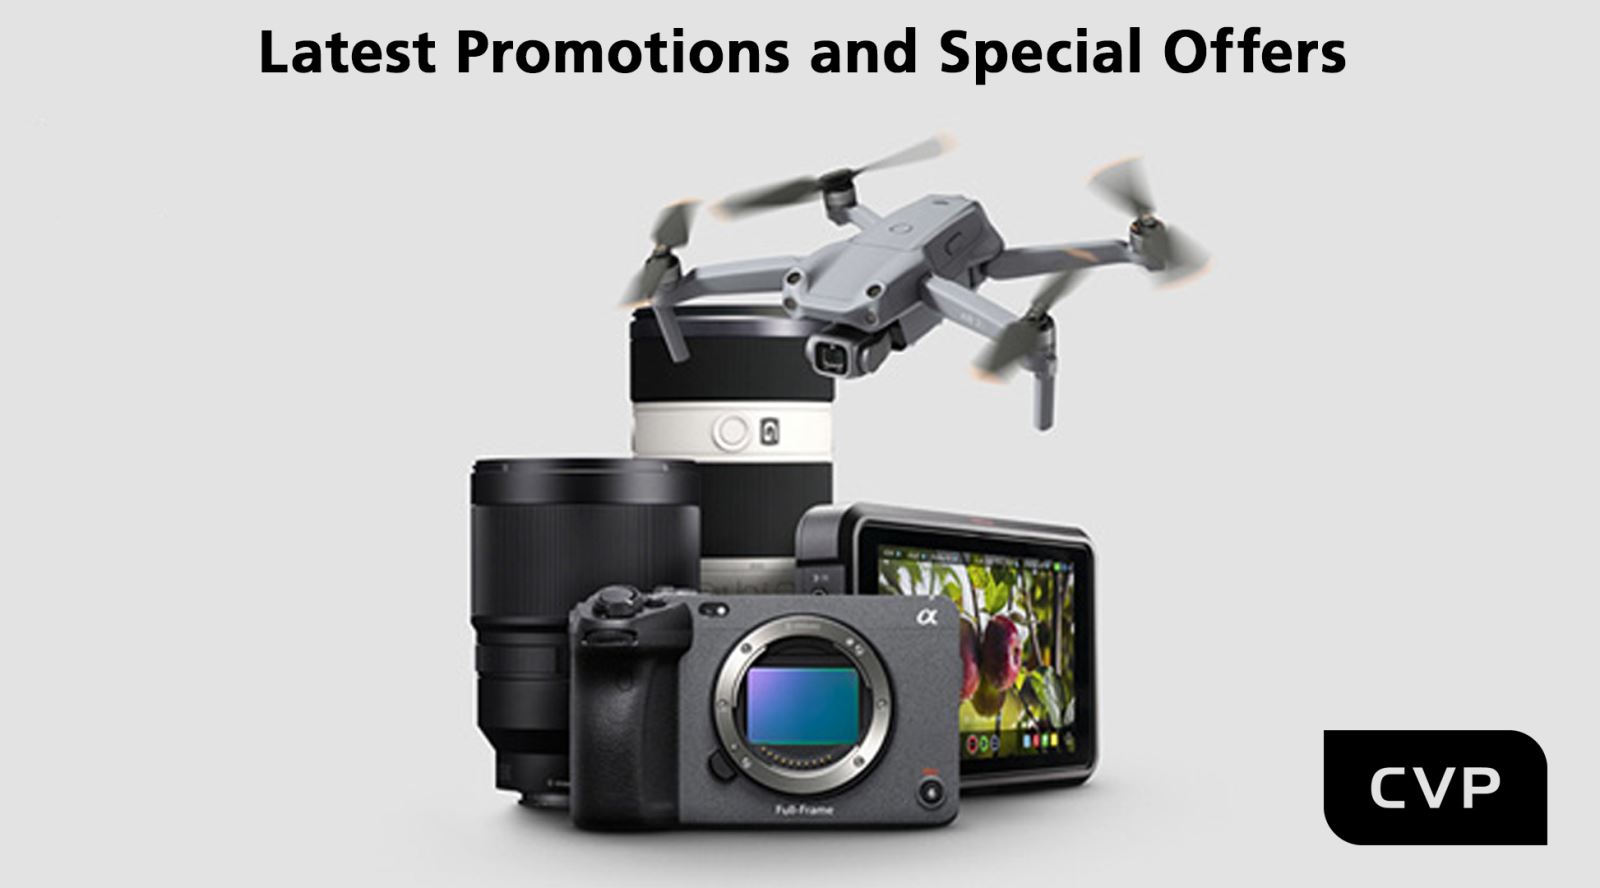 CVP Latest Promotions and Special Offers